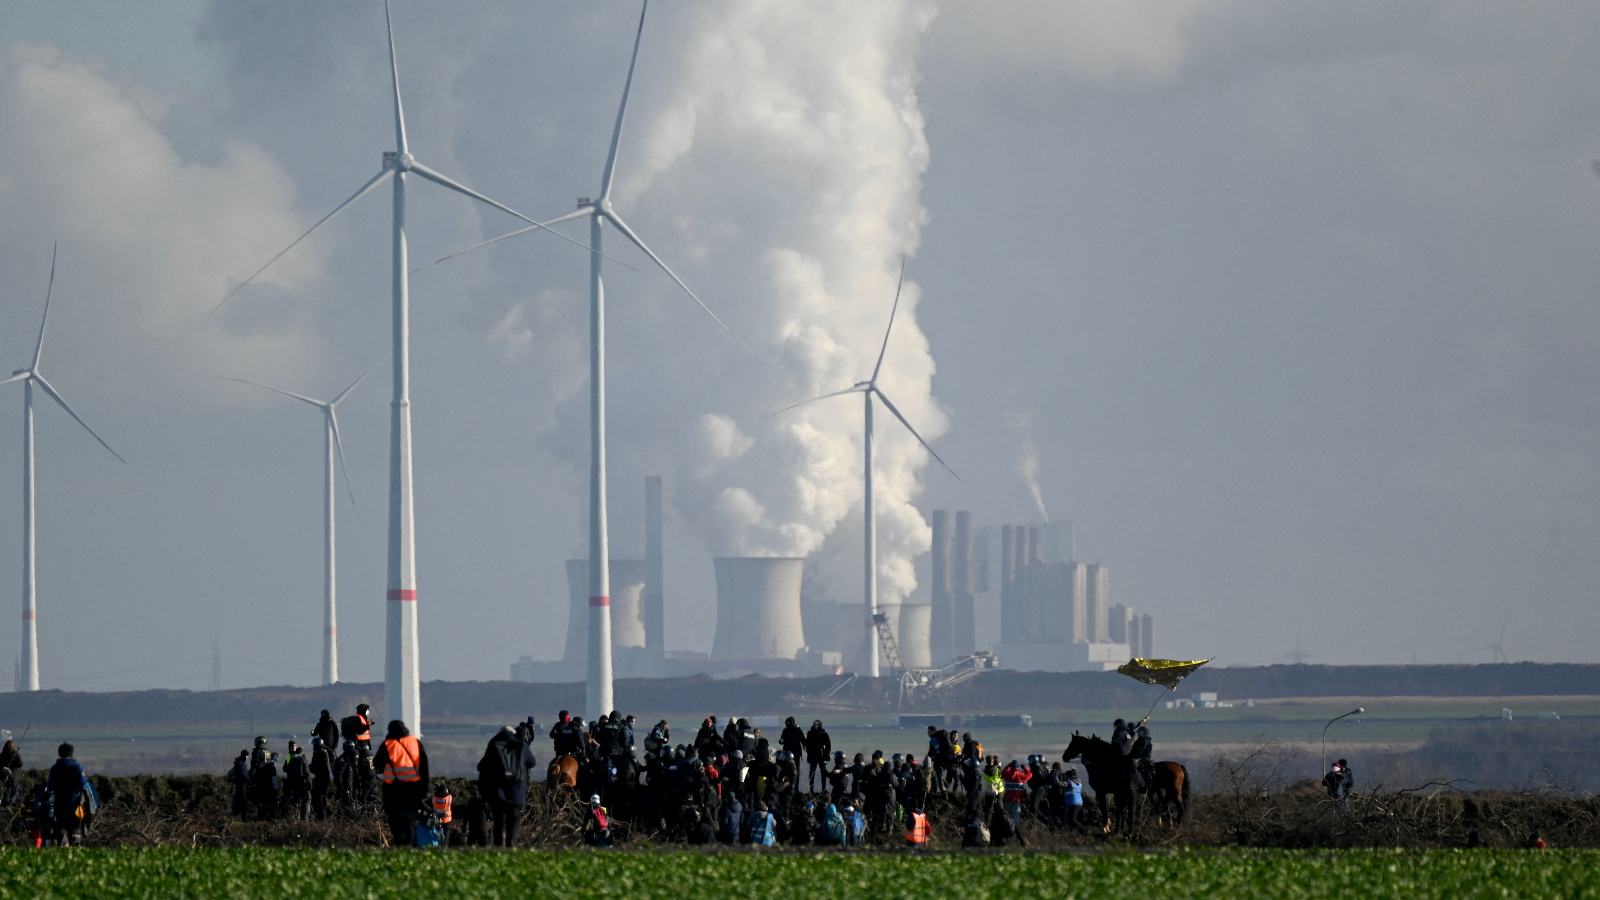 Photo of a group gathering in front of a backdrop of industrial smokestacks and wind turbines